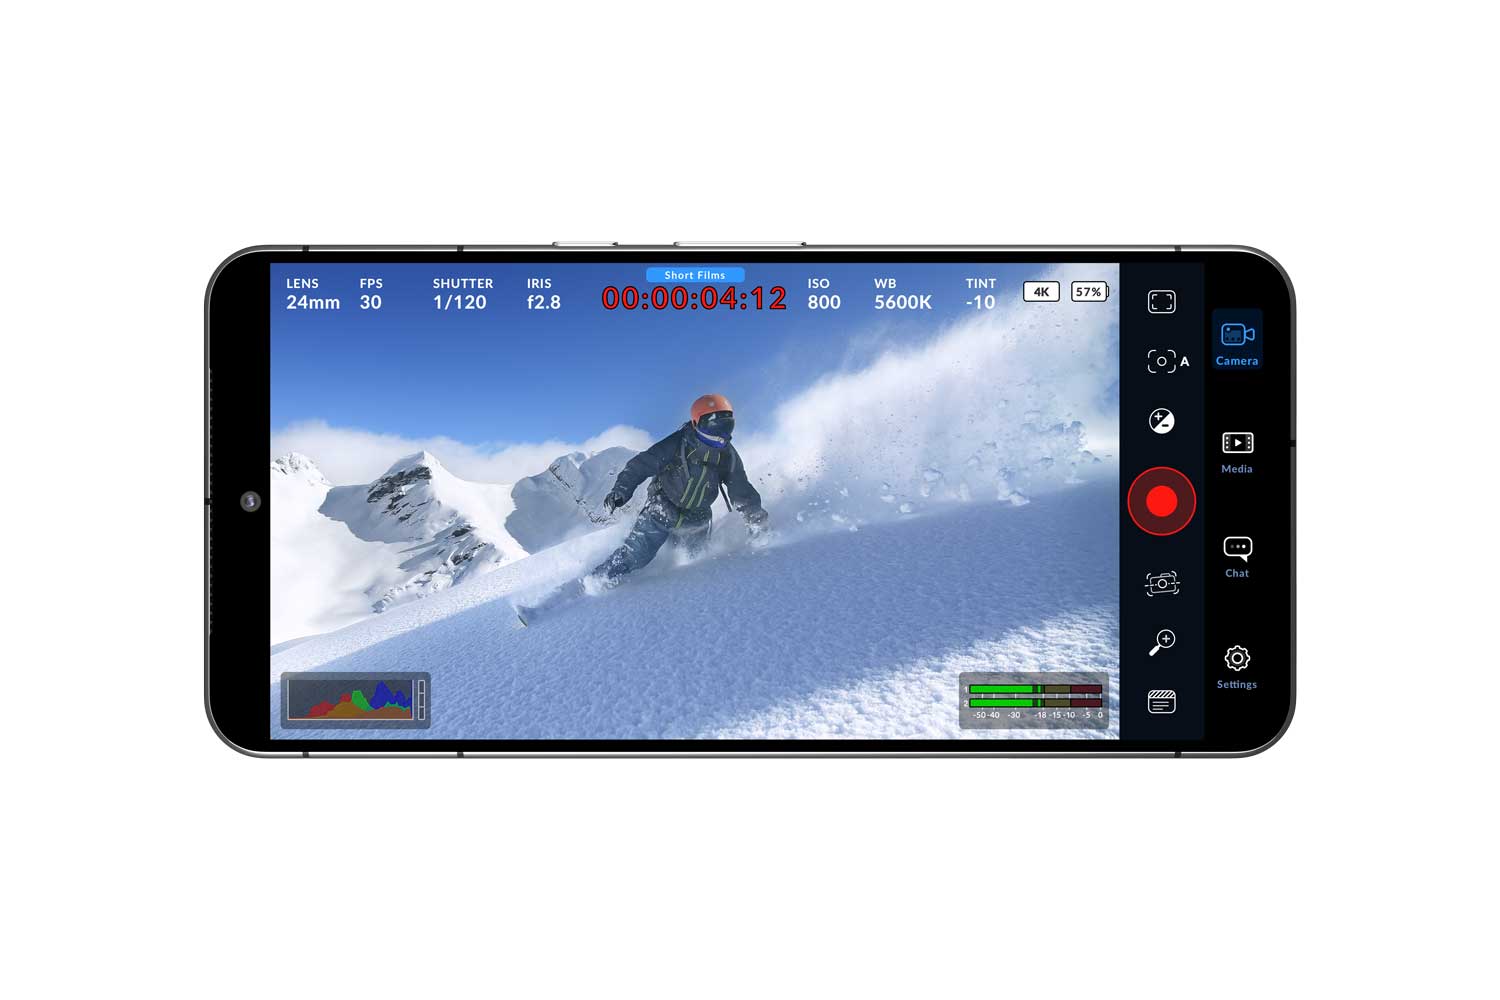 Blackmagic Camera For Android